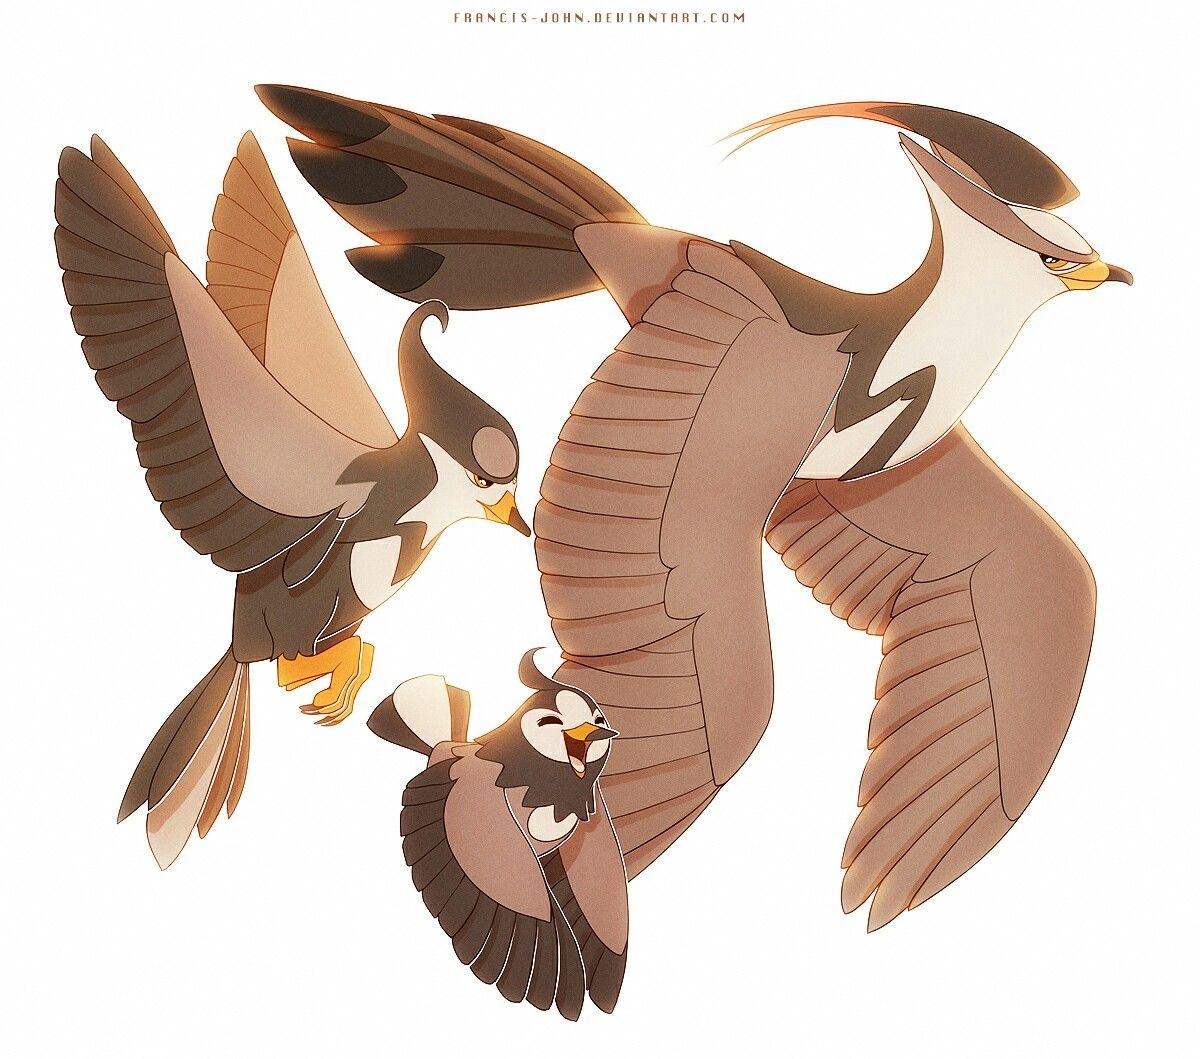 Starly, Staravia, and Staraptor | An Entire Board Full of Starly …